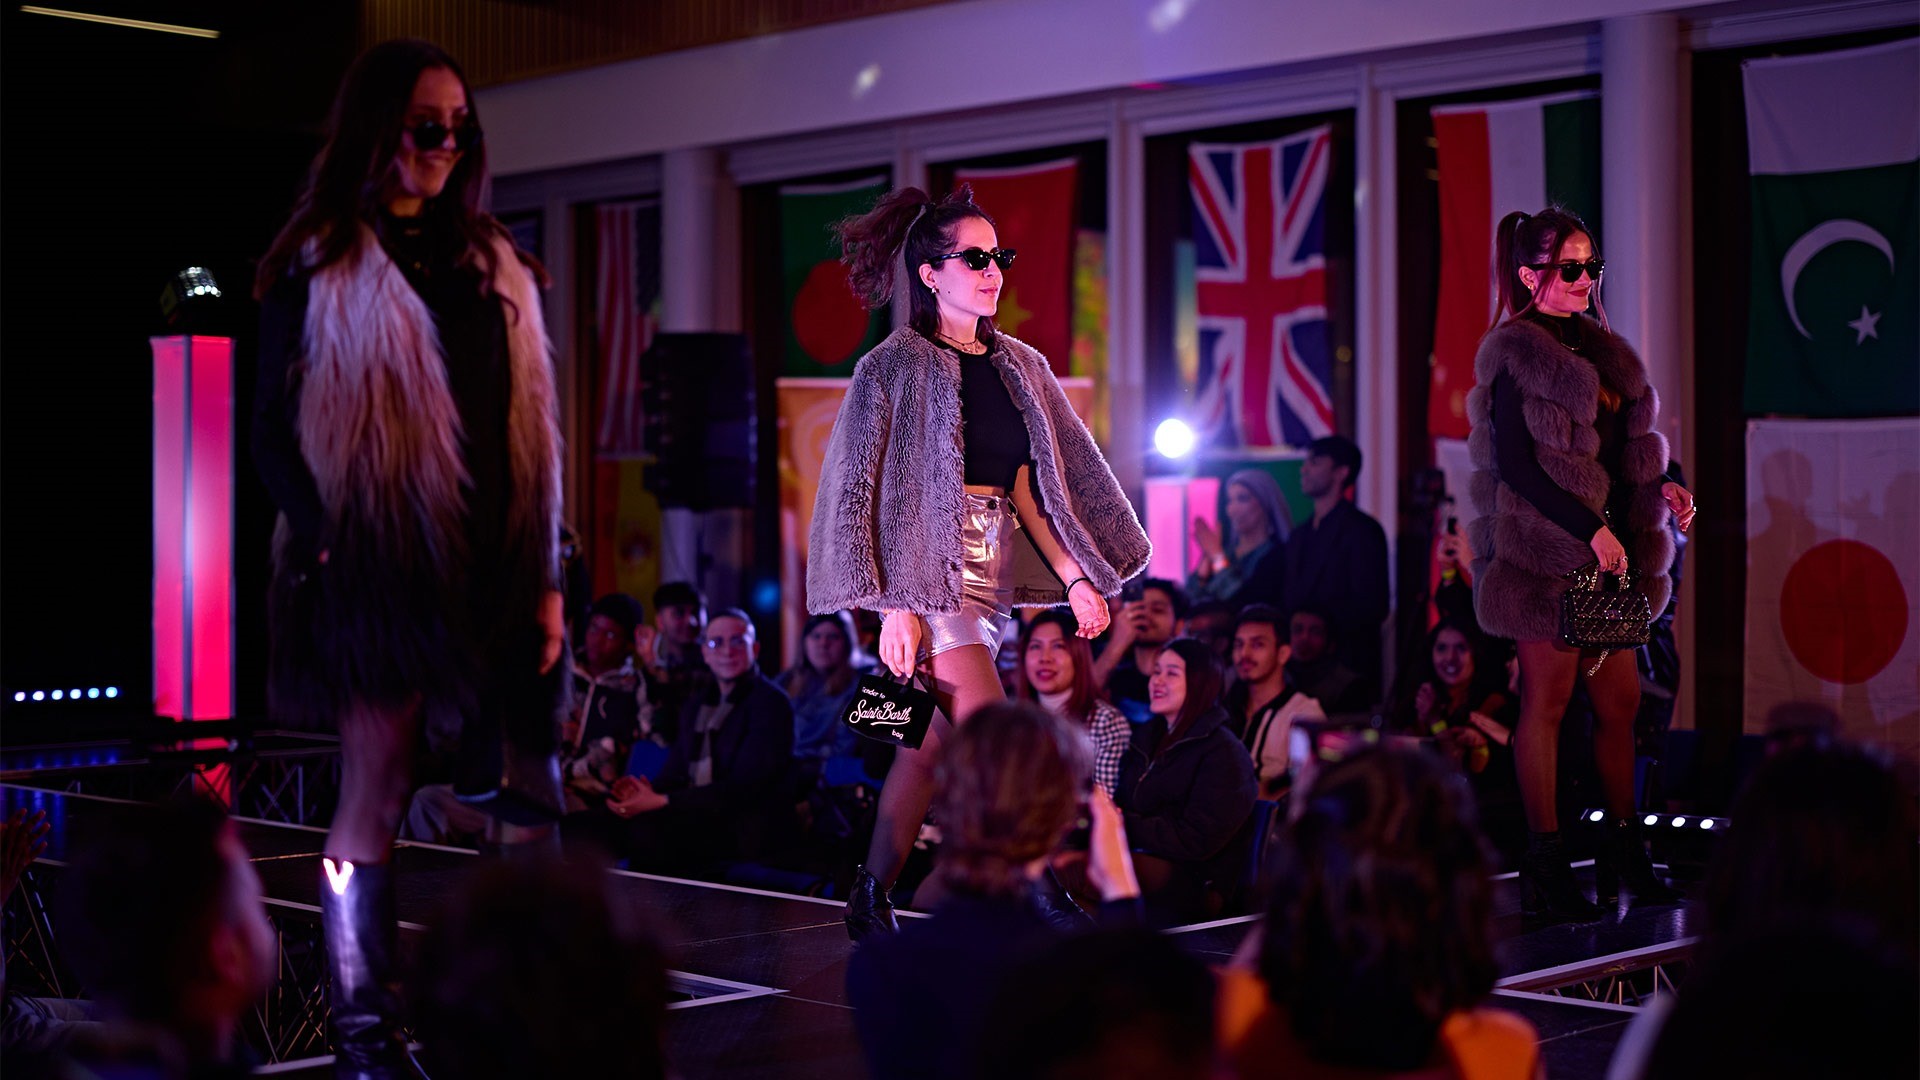 A woman walking on a catwalk in a fashion show